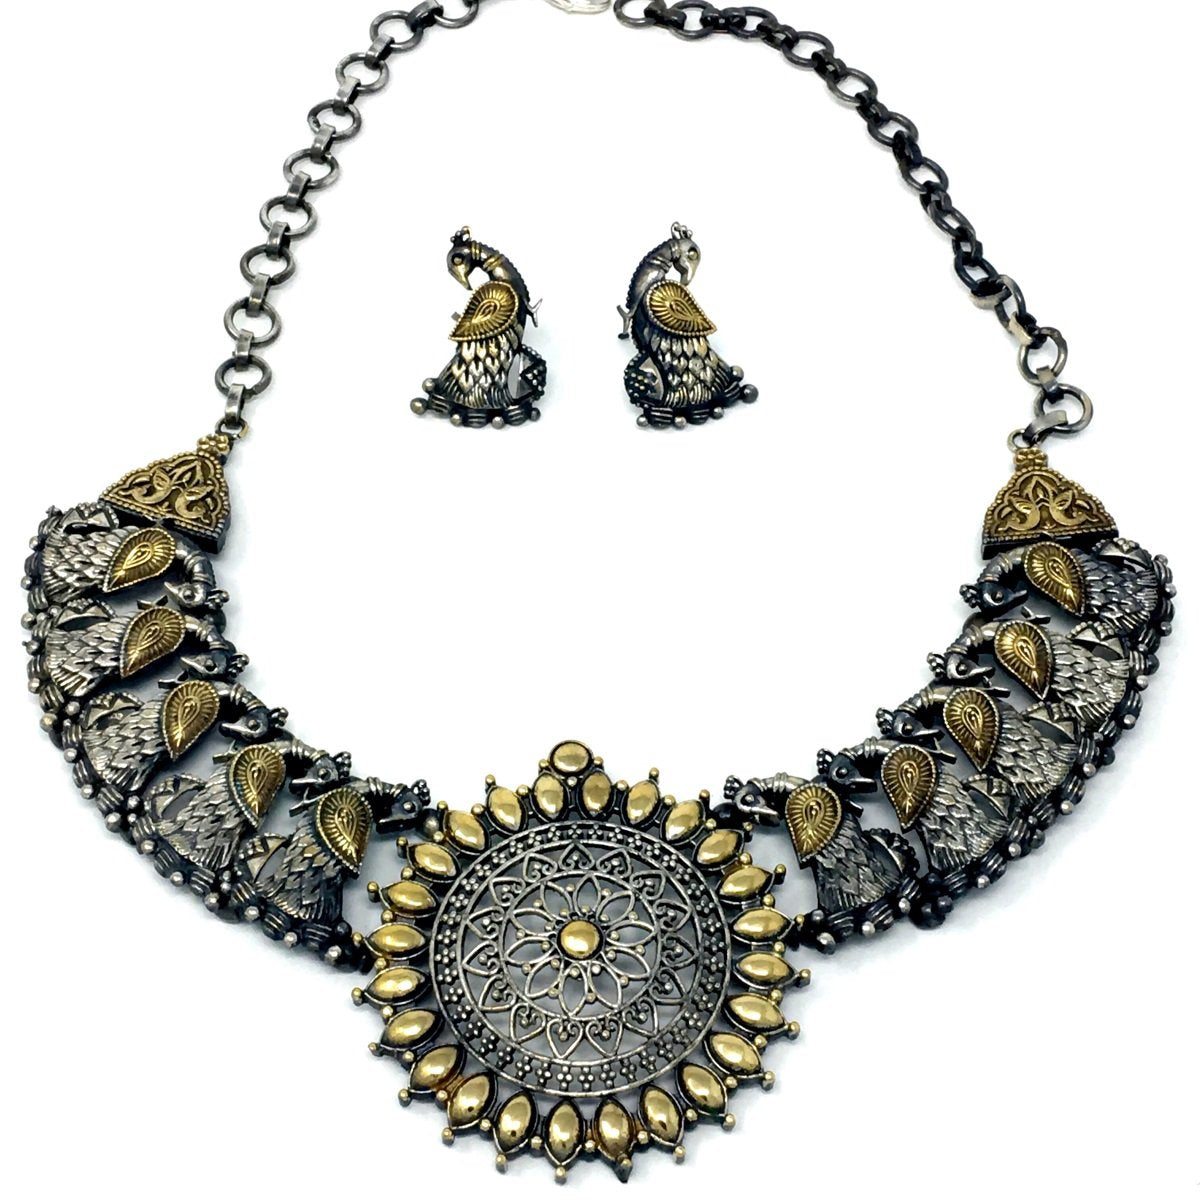 Antique Silver Peacock Necklace Set with Earrings